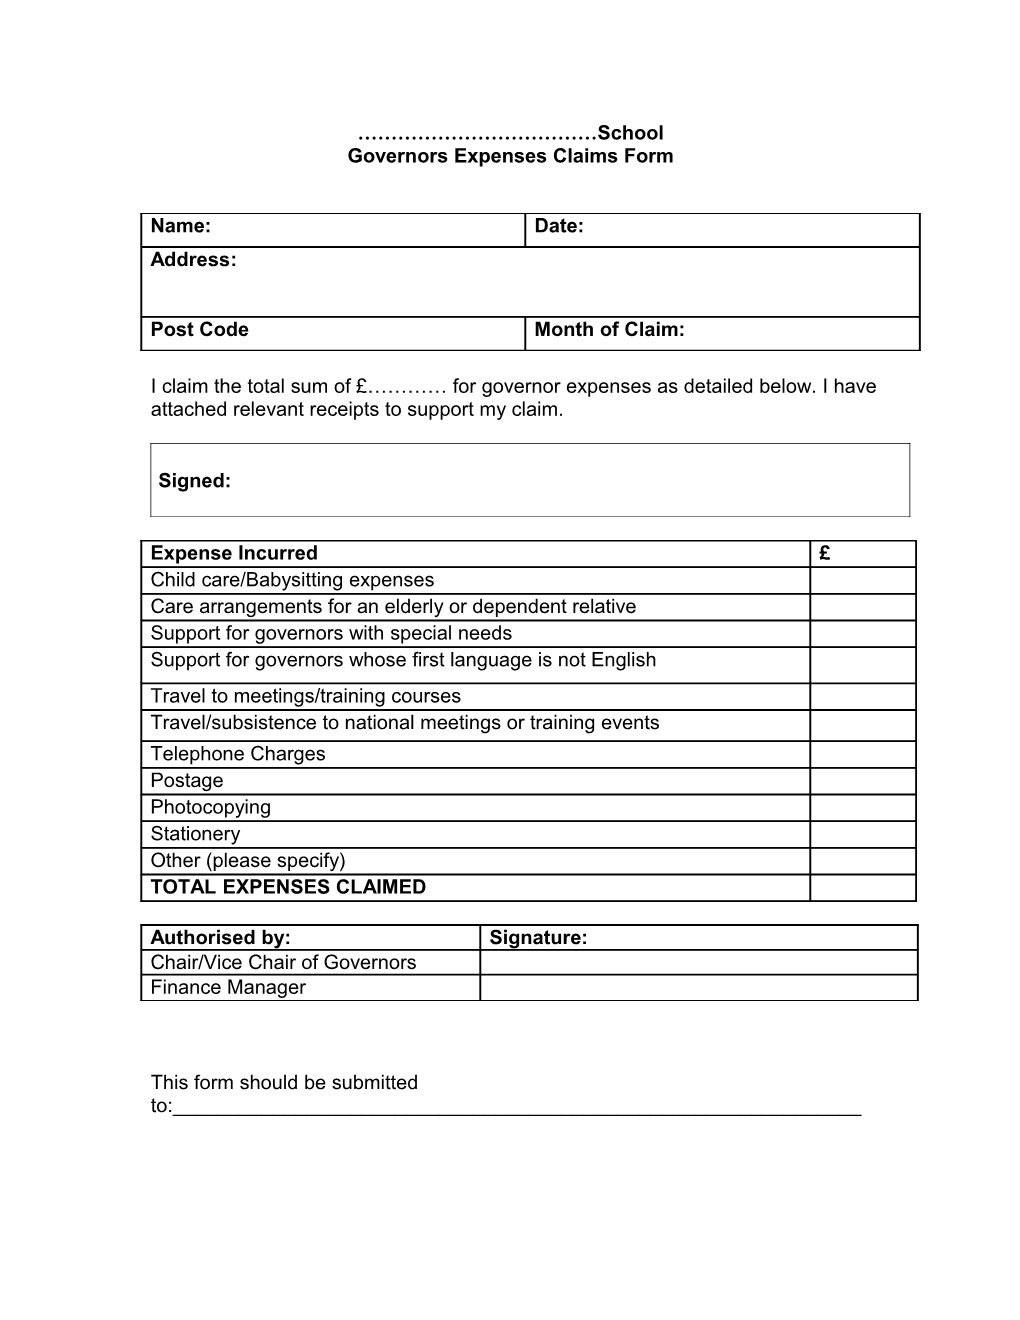 Draft Governors Expenses Policy and Claim Form